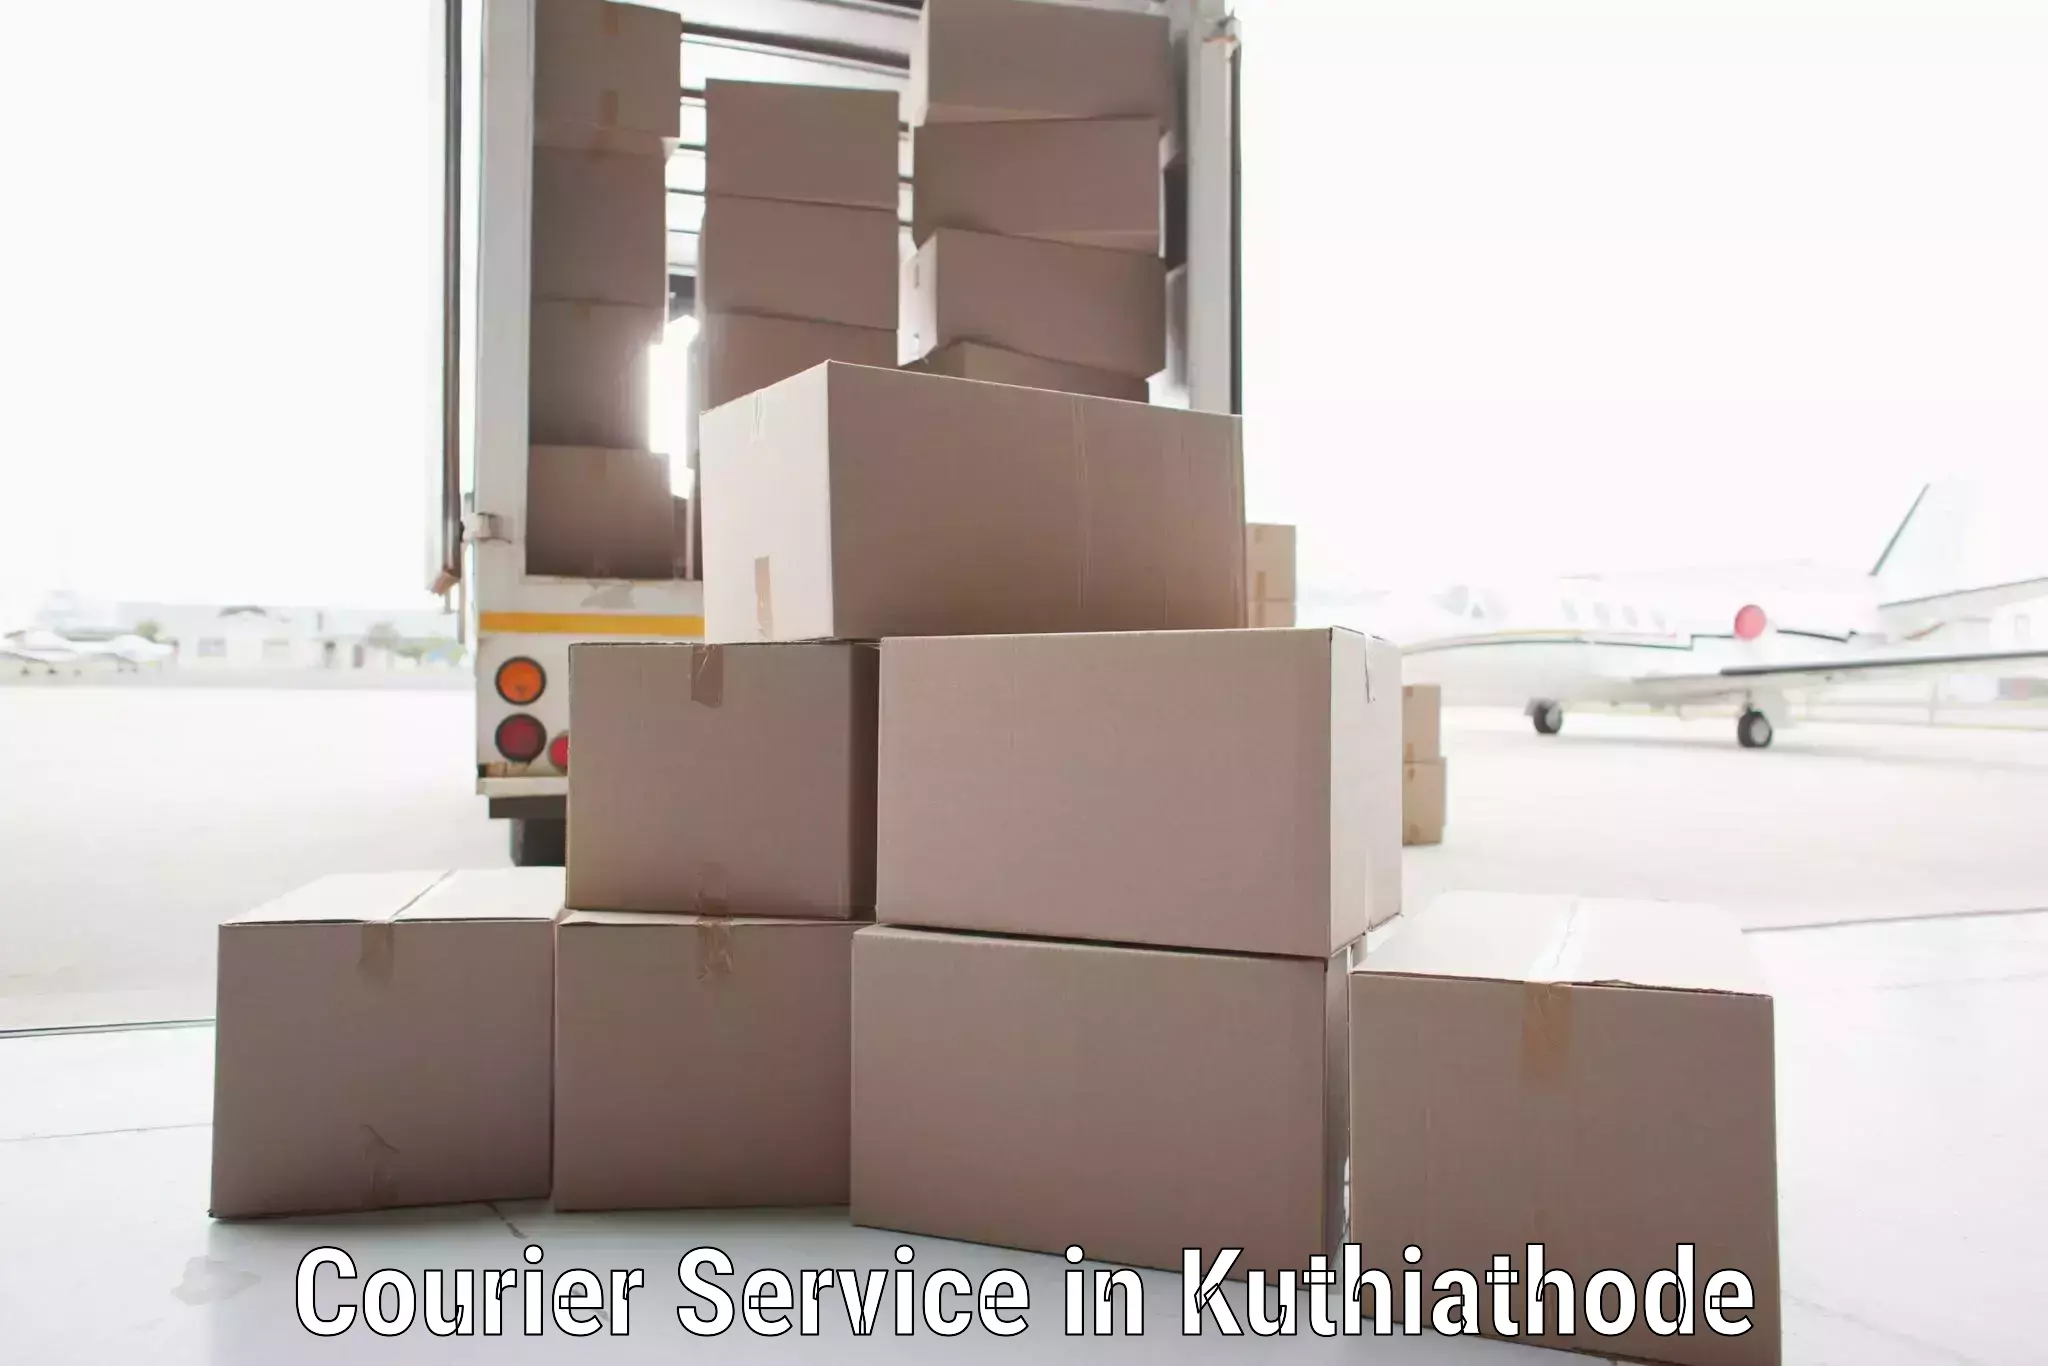 Subscription-based courier in Kuthiathode